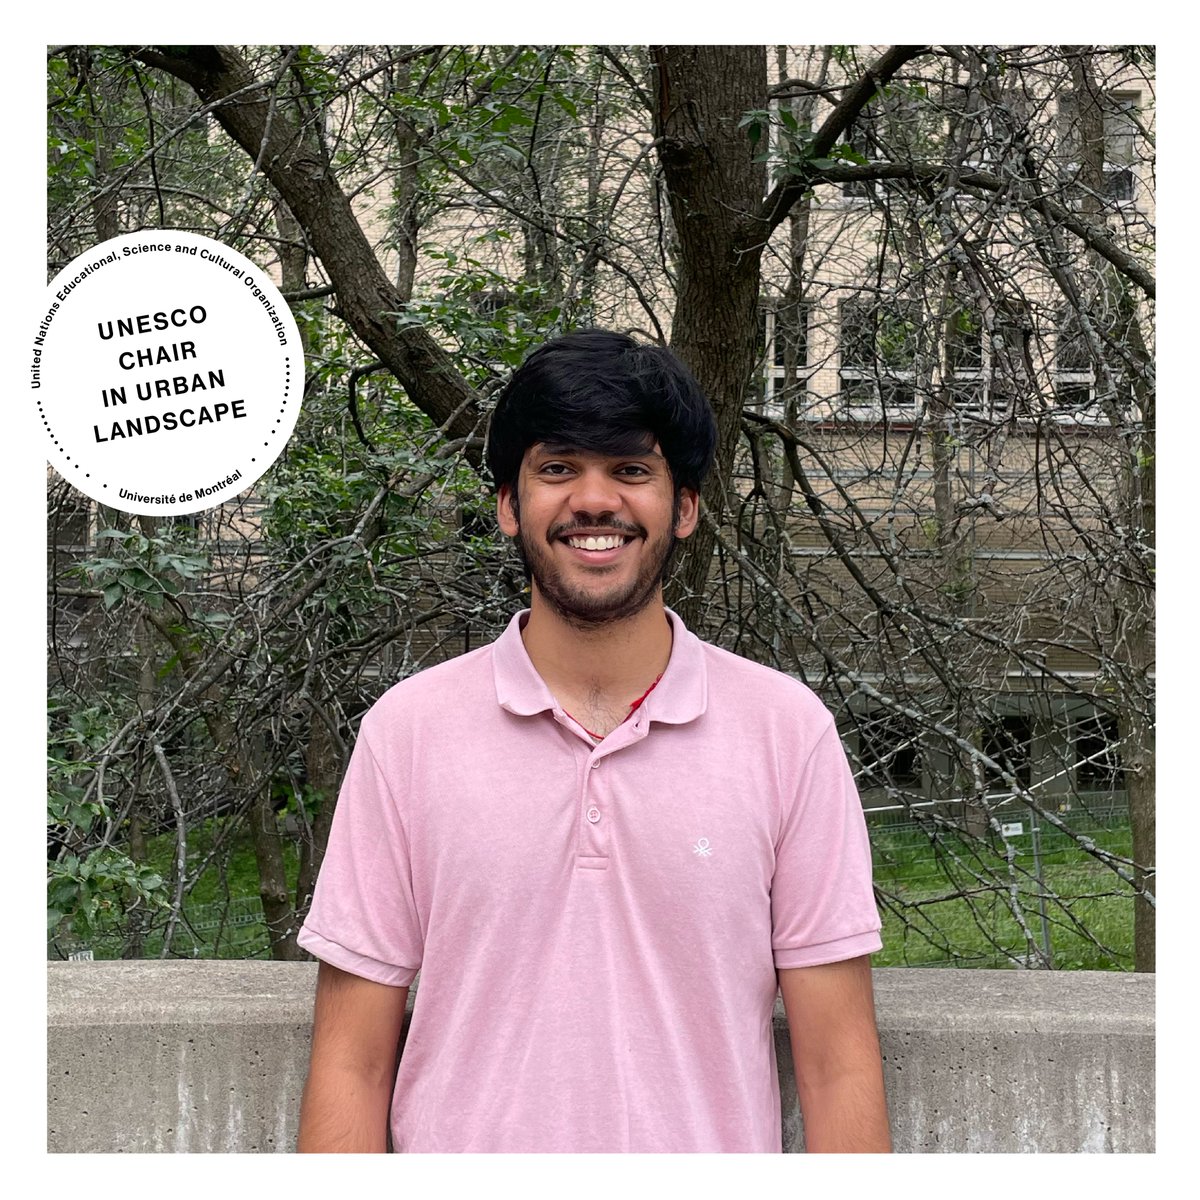 🔦SPOTLIGHT INTERN - Meet Anish Sai Potluri, Student in Computer Science from IIIT Bangalore India. Anish is an intern in the ESPACE IA/EDI project; which aims to generate an AI-based tool capable of measuring inclusion in Montreal’s public spaces. #ArtificialIntelligence